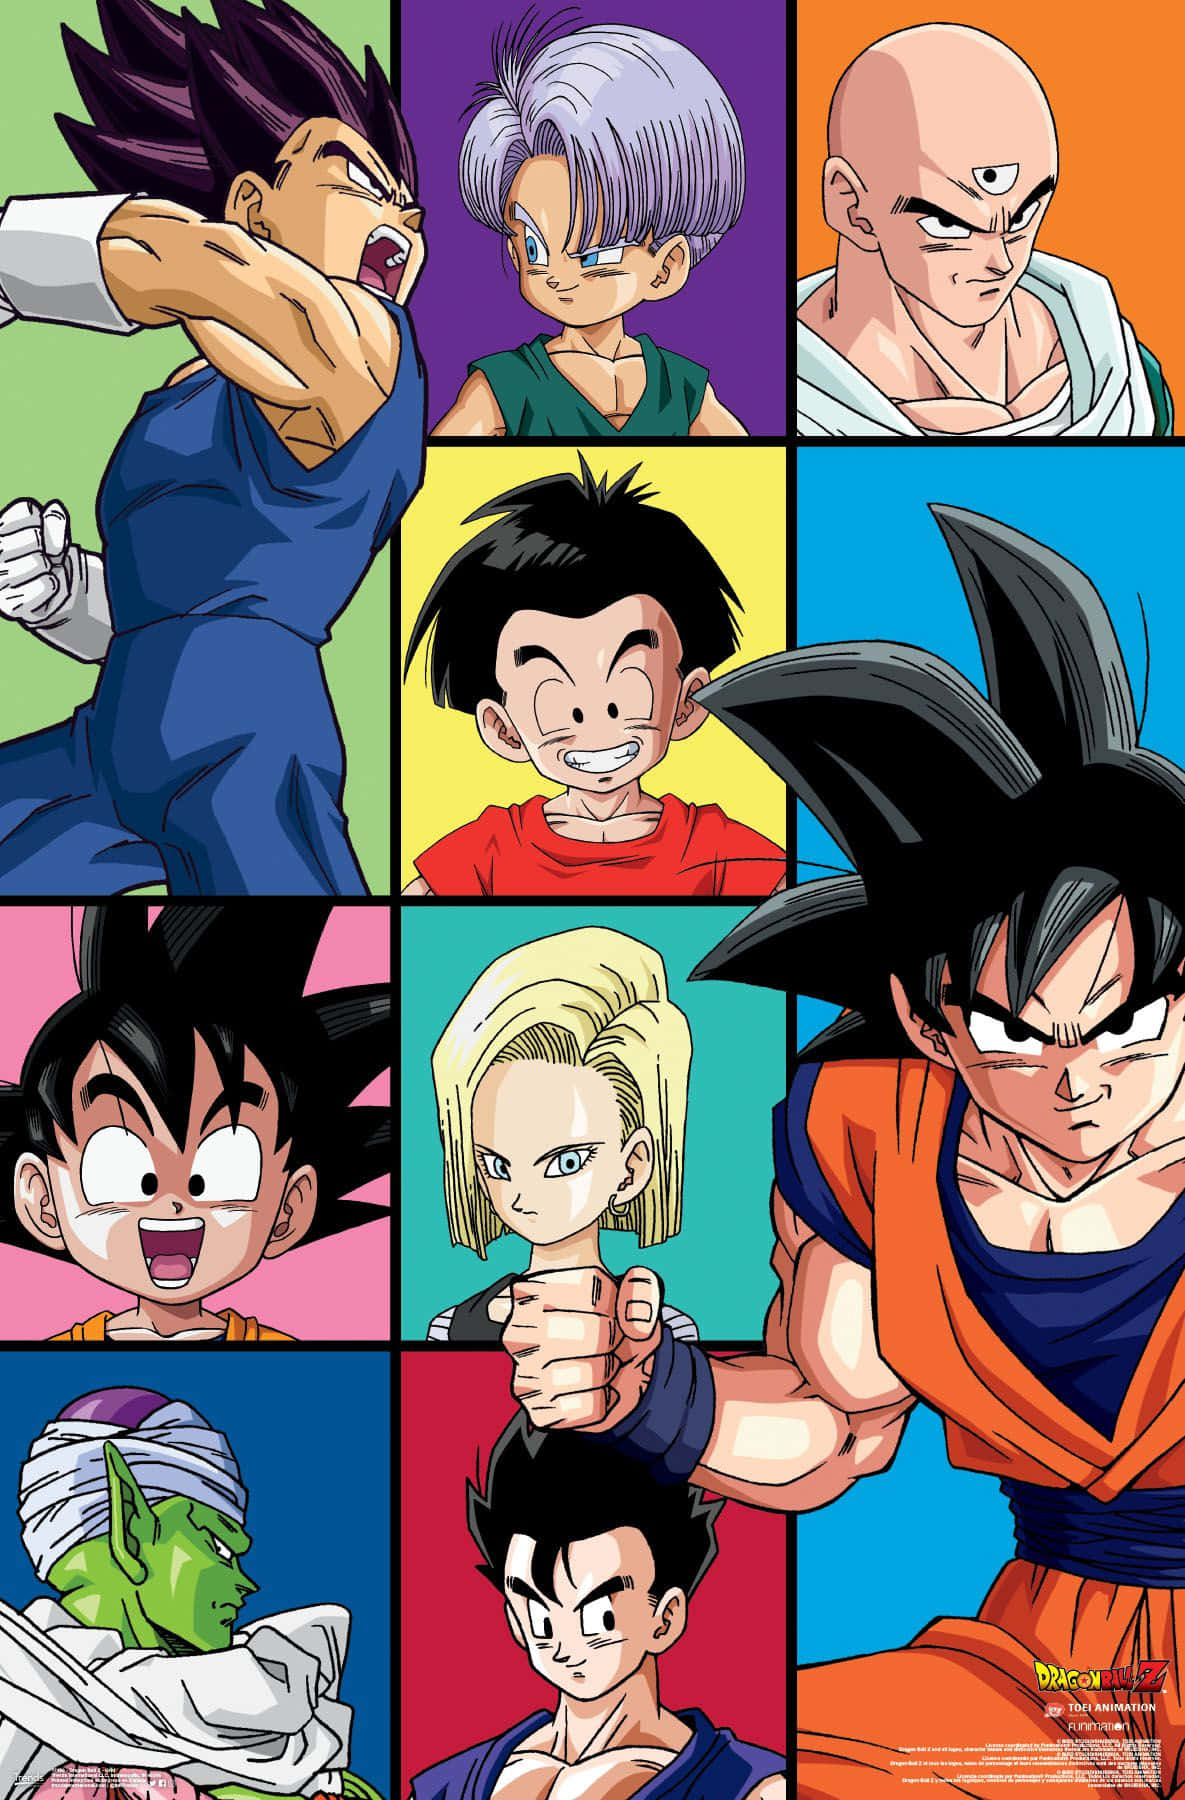 Cute Dragonball Z Poster Pictures